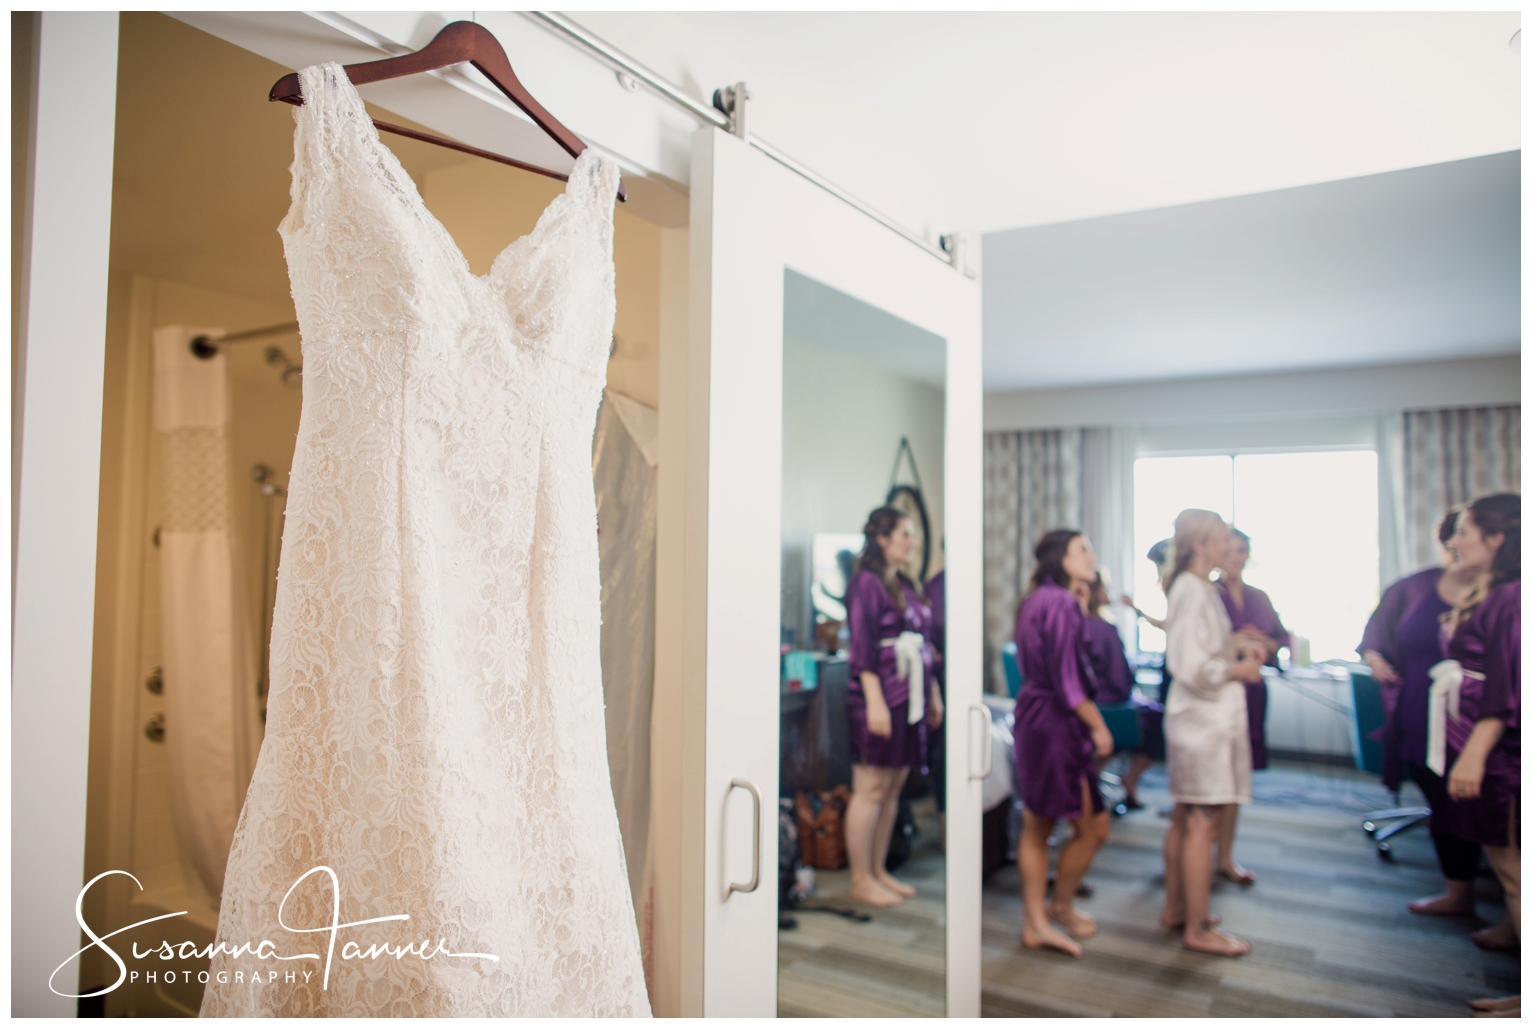 Indianapolis Outdoor Wedding, wedding dress hanging from doorway while bridesmaids are in distance